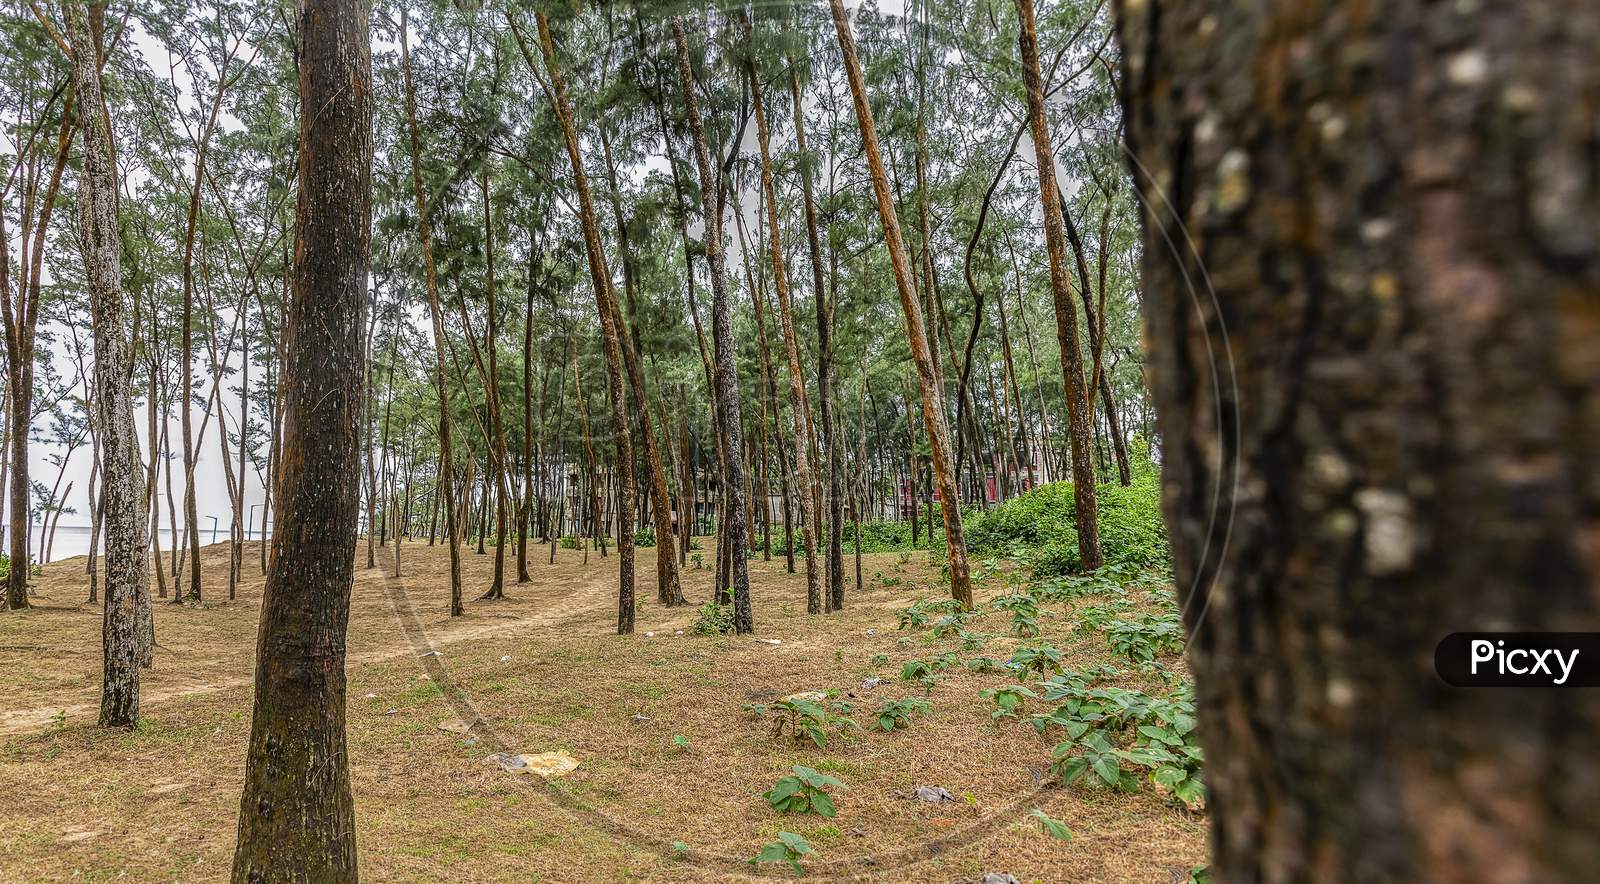 Pine Forest Garden By The Sea Beach At Bay Of Bengal In Front Of The Hotels Of Digha West Bengal India, Asia.